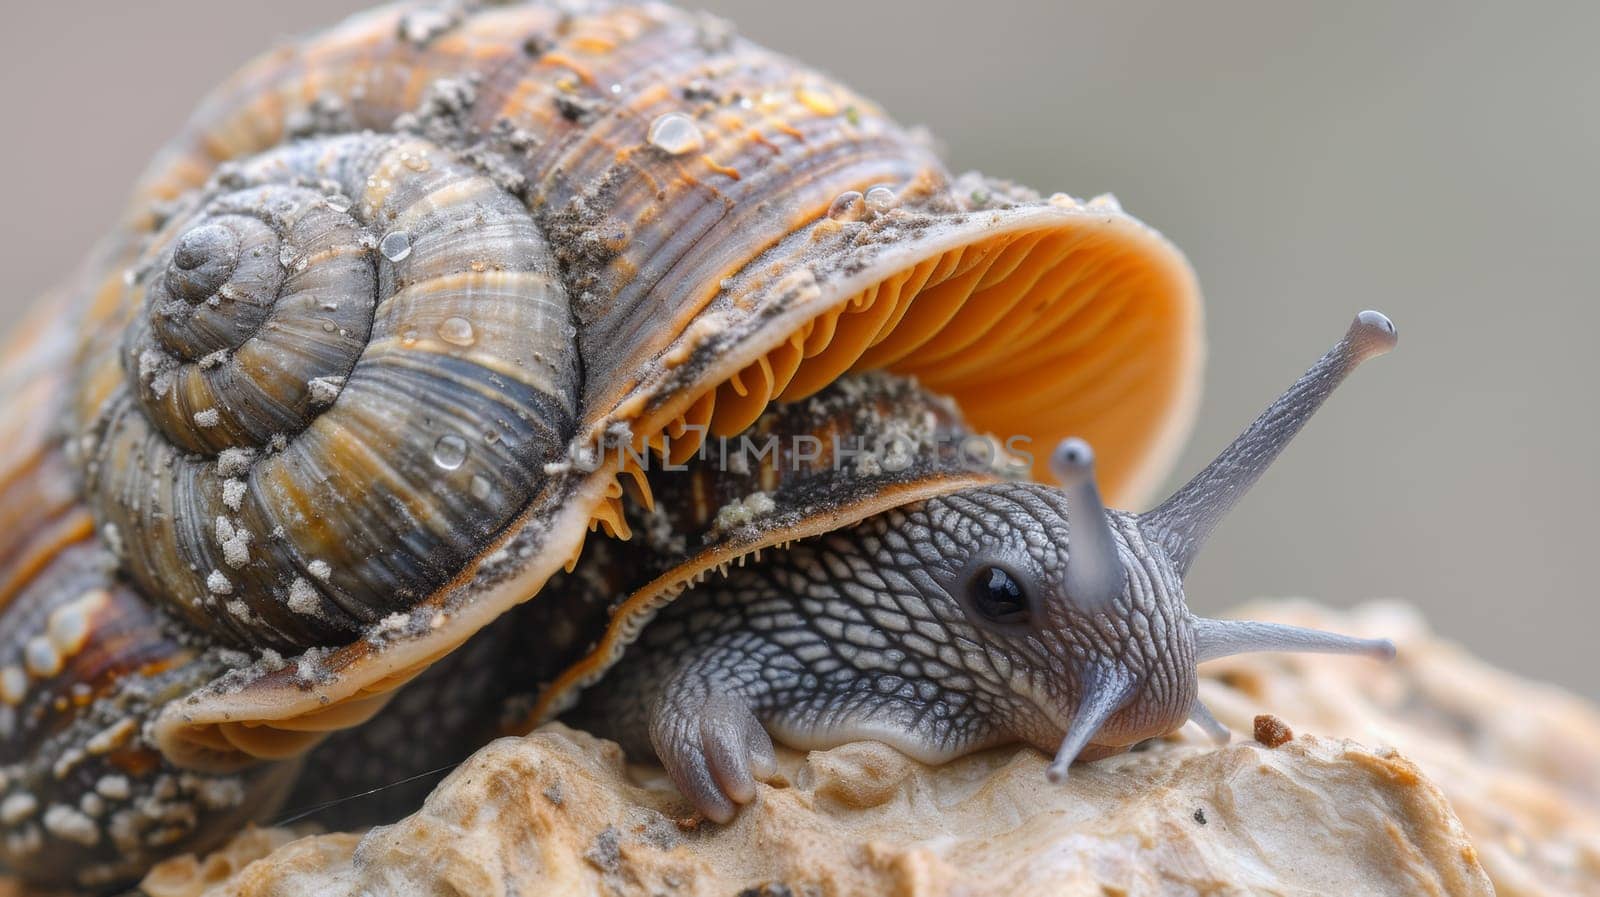 A snail is sitting on top of a rock with its shell open